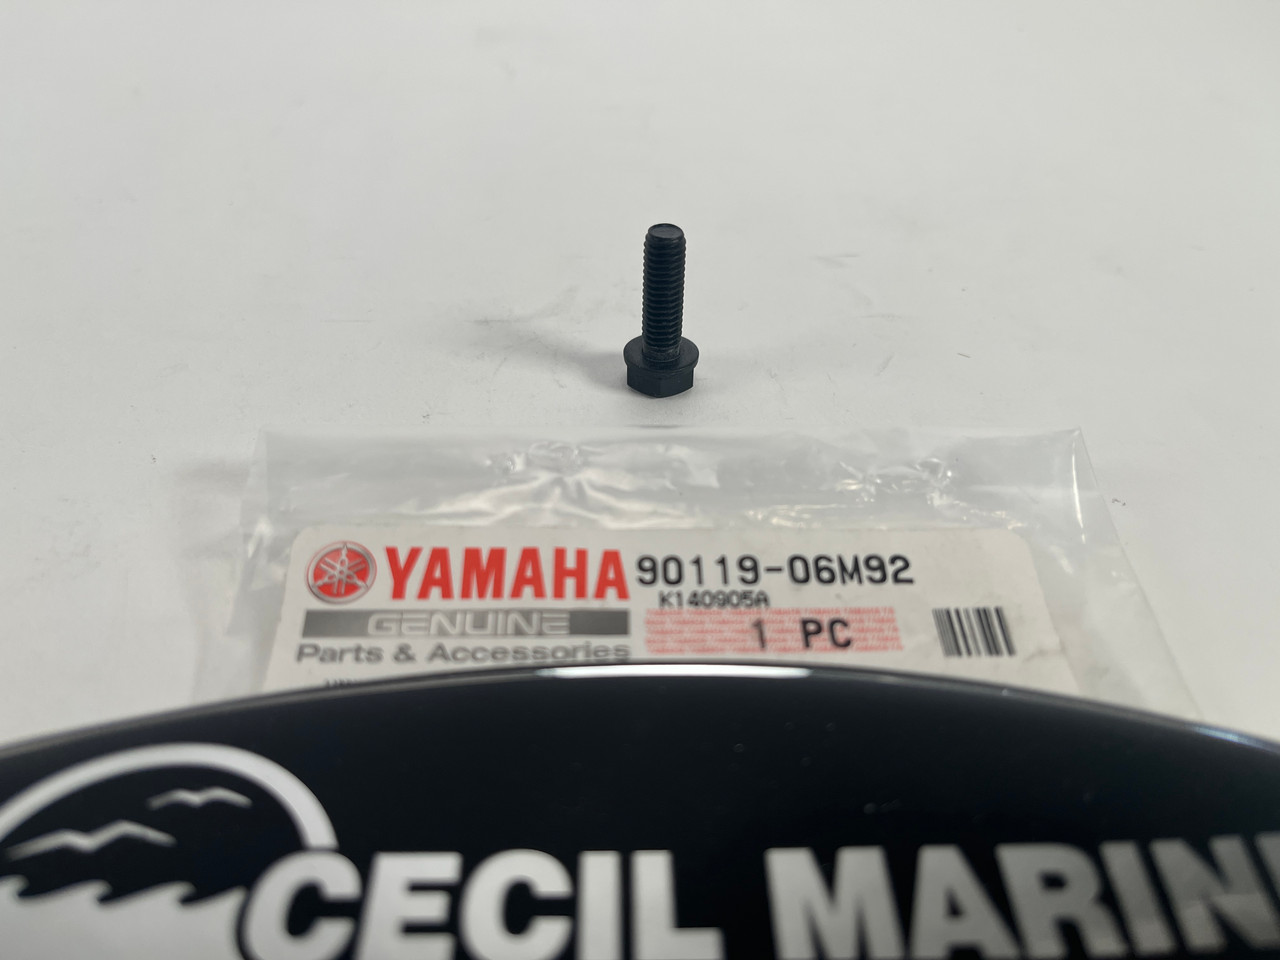 $7.99* GENUINE YAMAHA no tax* BOLT, WITH 90119-06M92-00 *In Stock & Ready To Ship